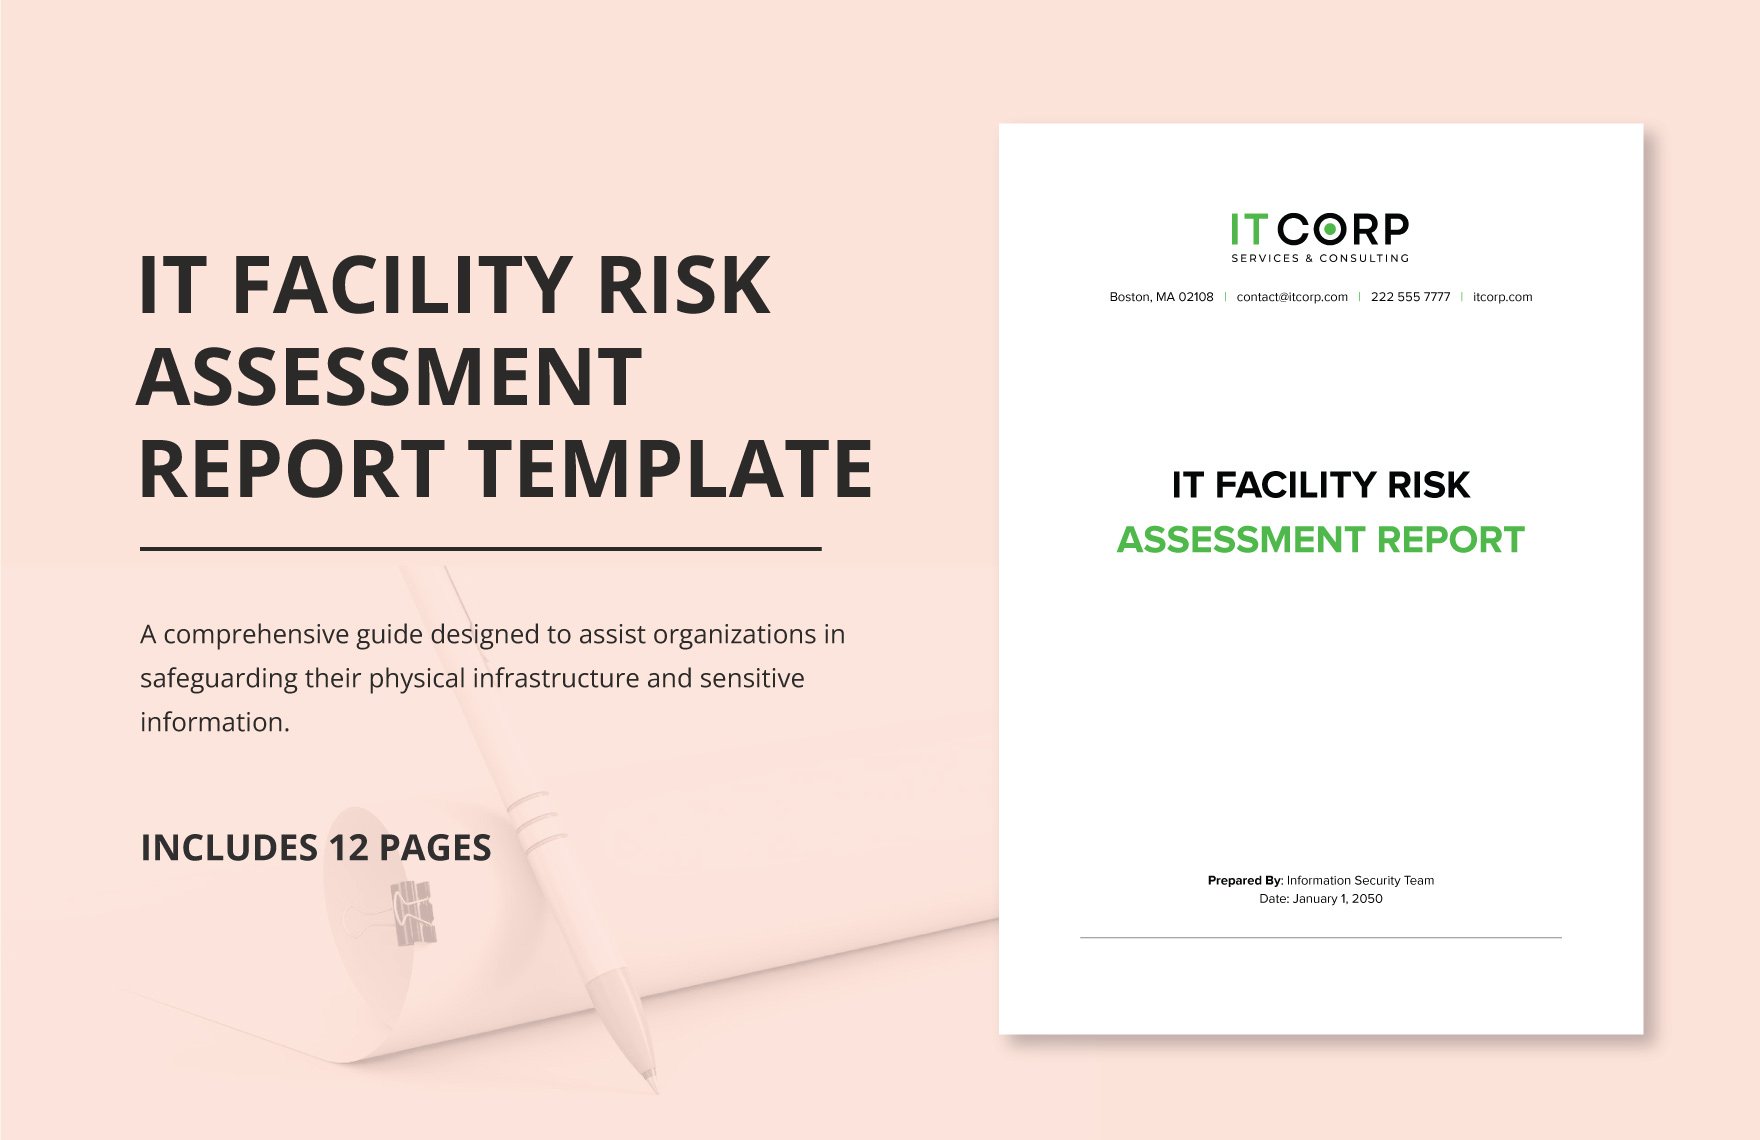 IT Facility Risk Assessment Report Template